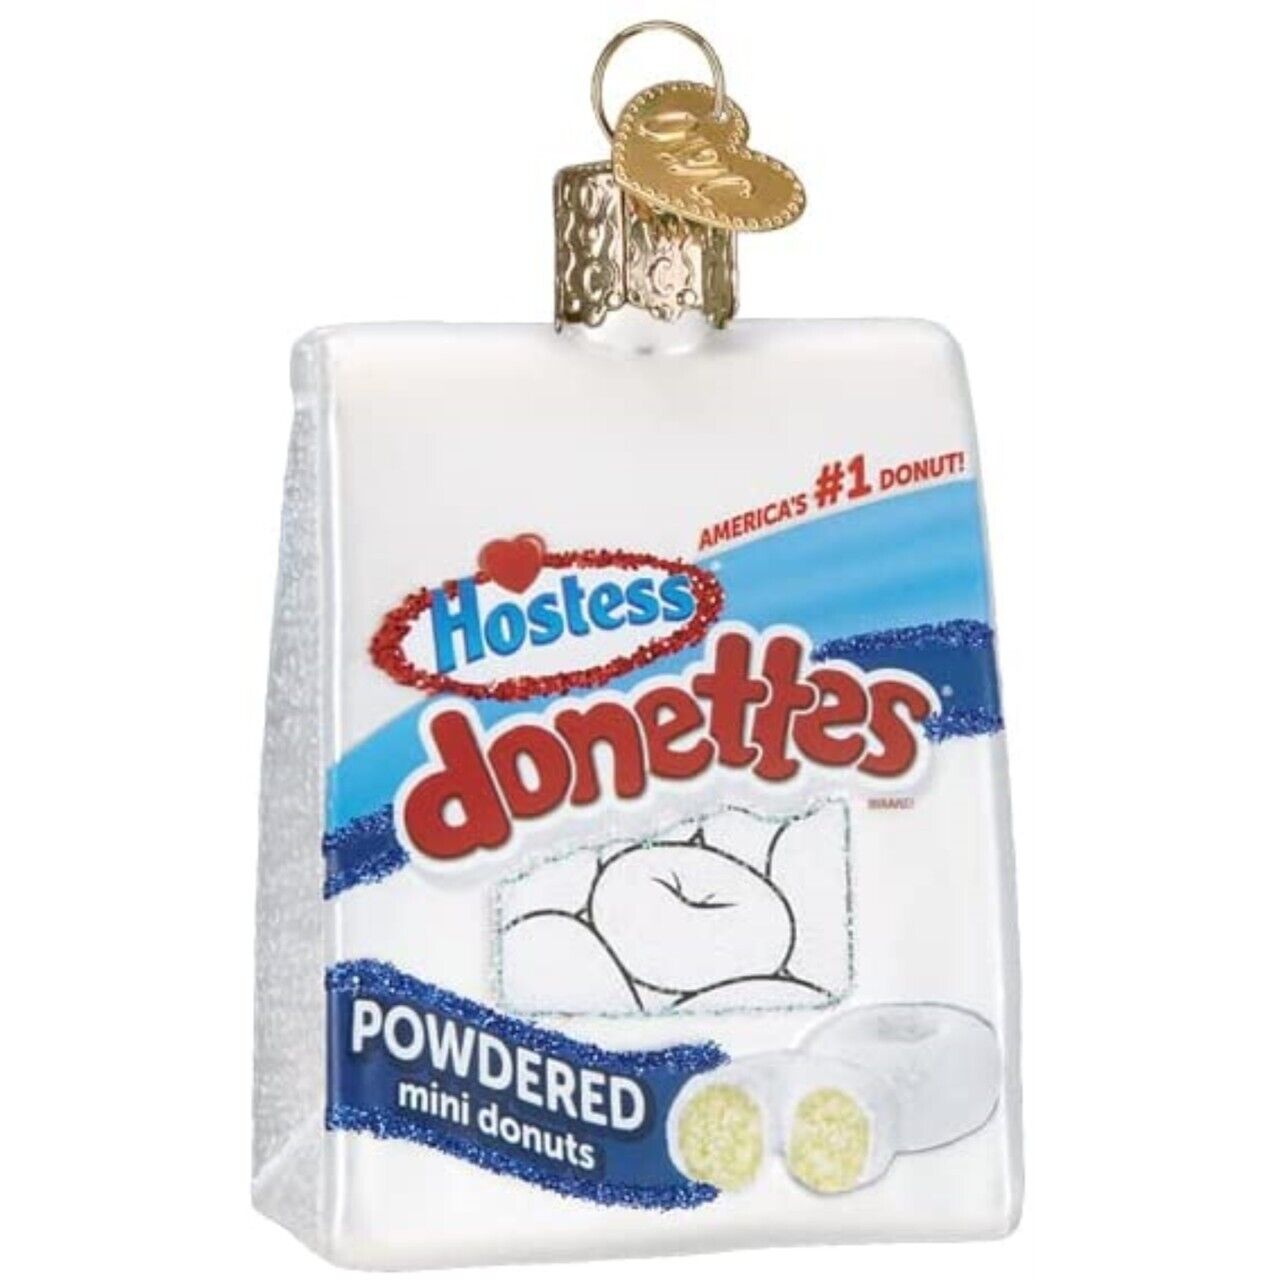 Old World Christmas HOSTESS DONETTES (32535) Glass Ornament w/OWC Box